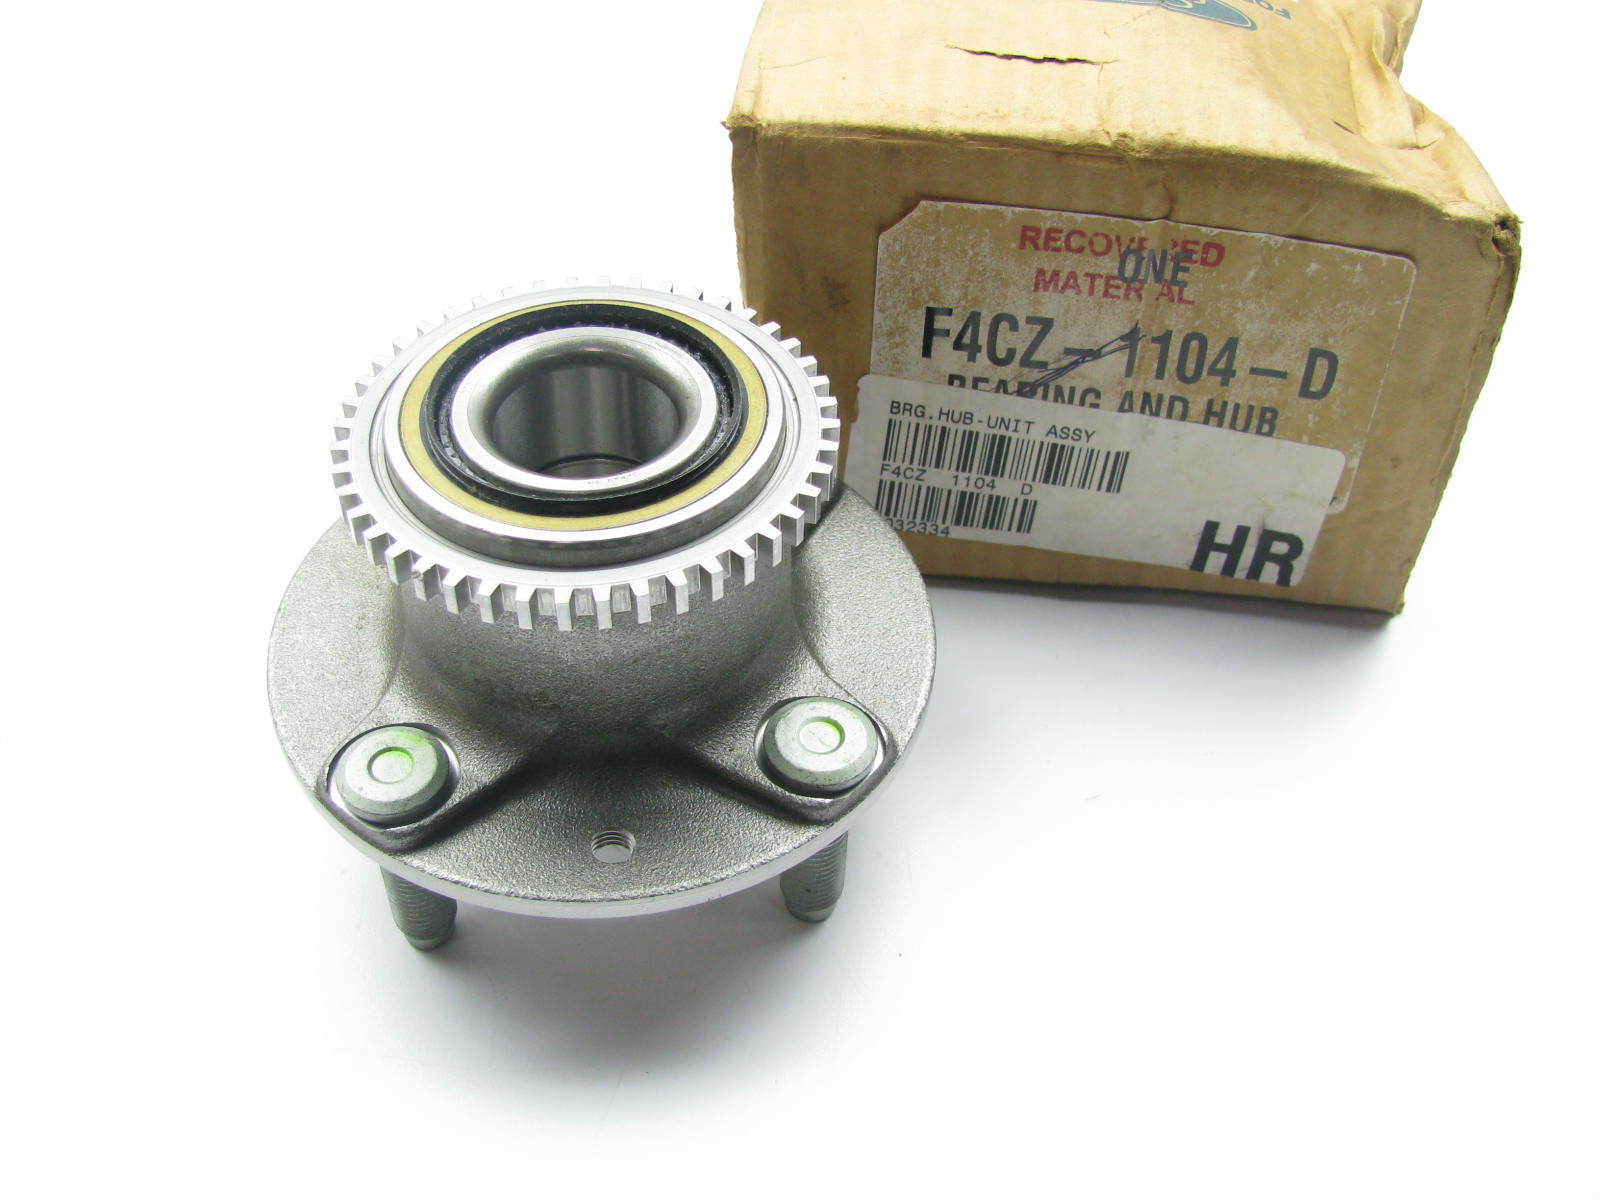 New OEM Rear Wheel Hub & Bearing For 94-03 Ford Escort FWD ONLY F4CZ-1104-D